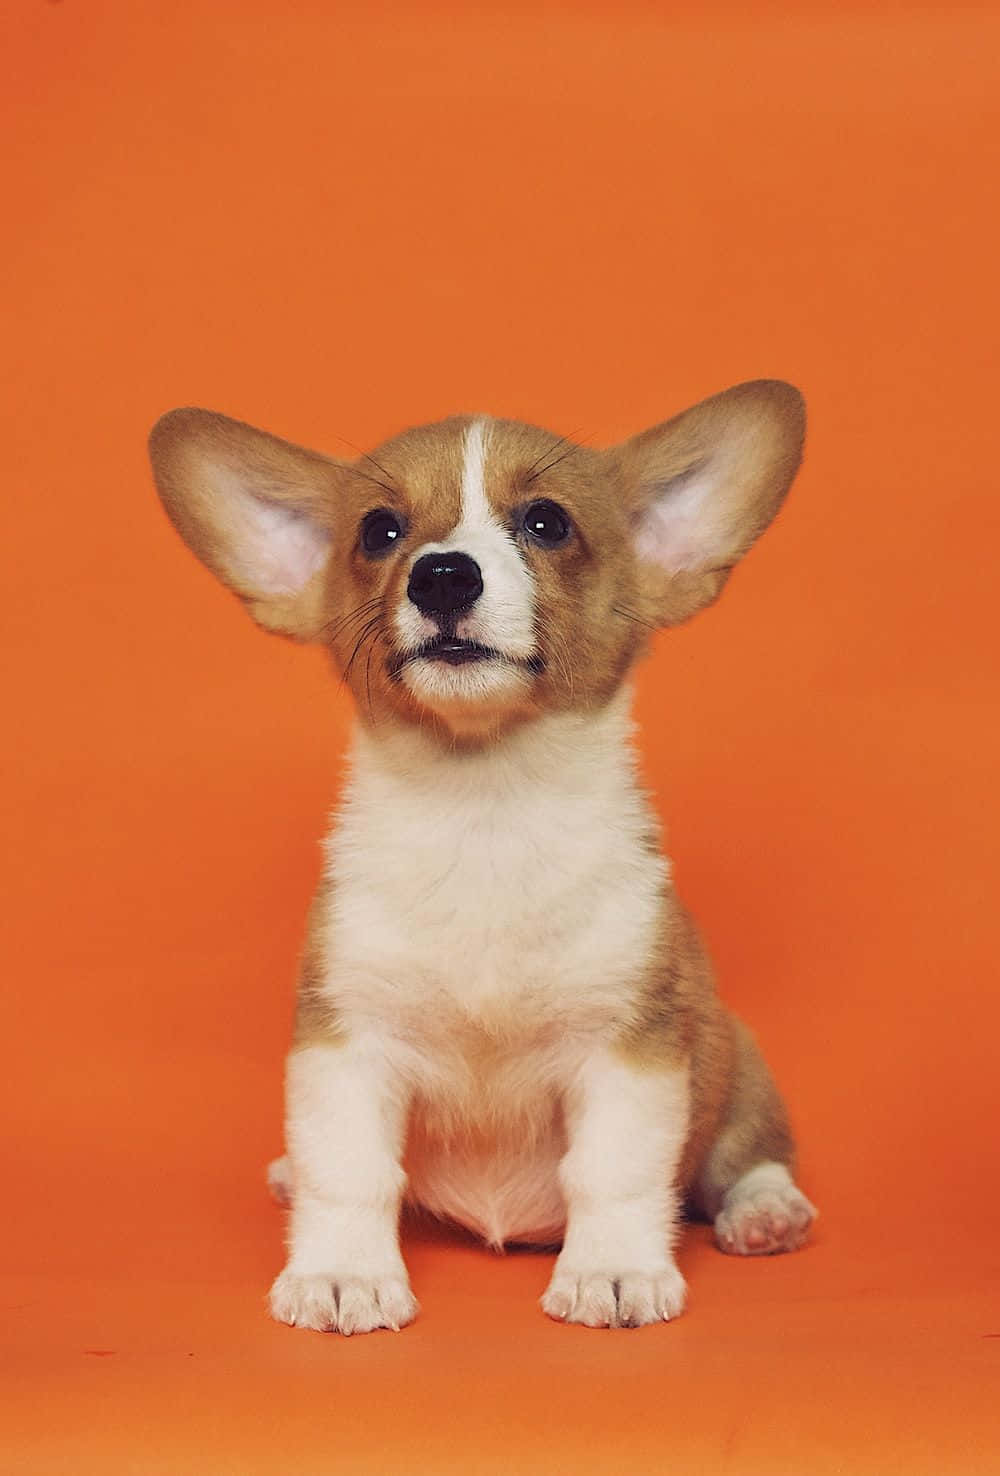 A Small Dog Is Sitting On An Orange Background